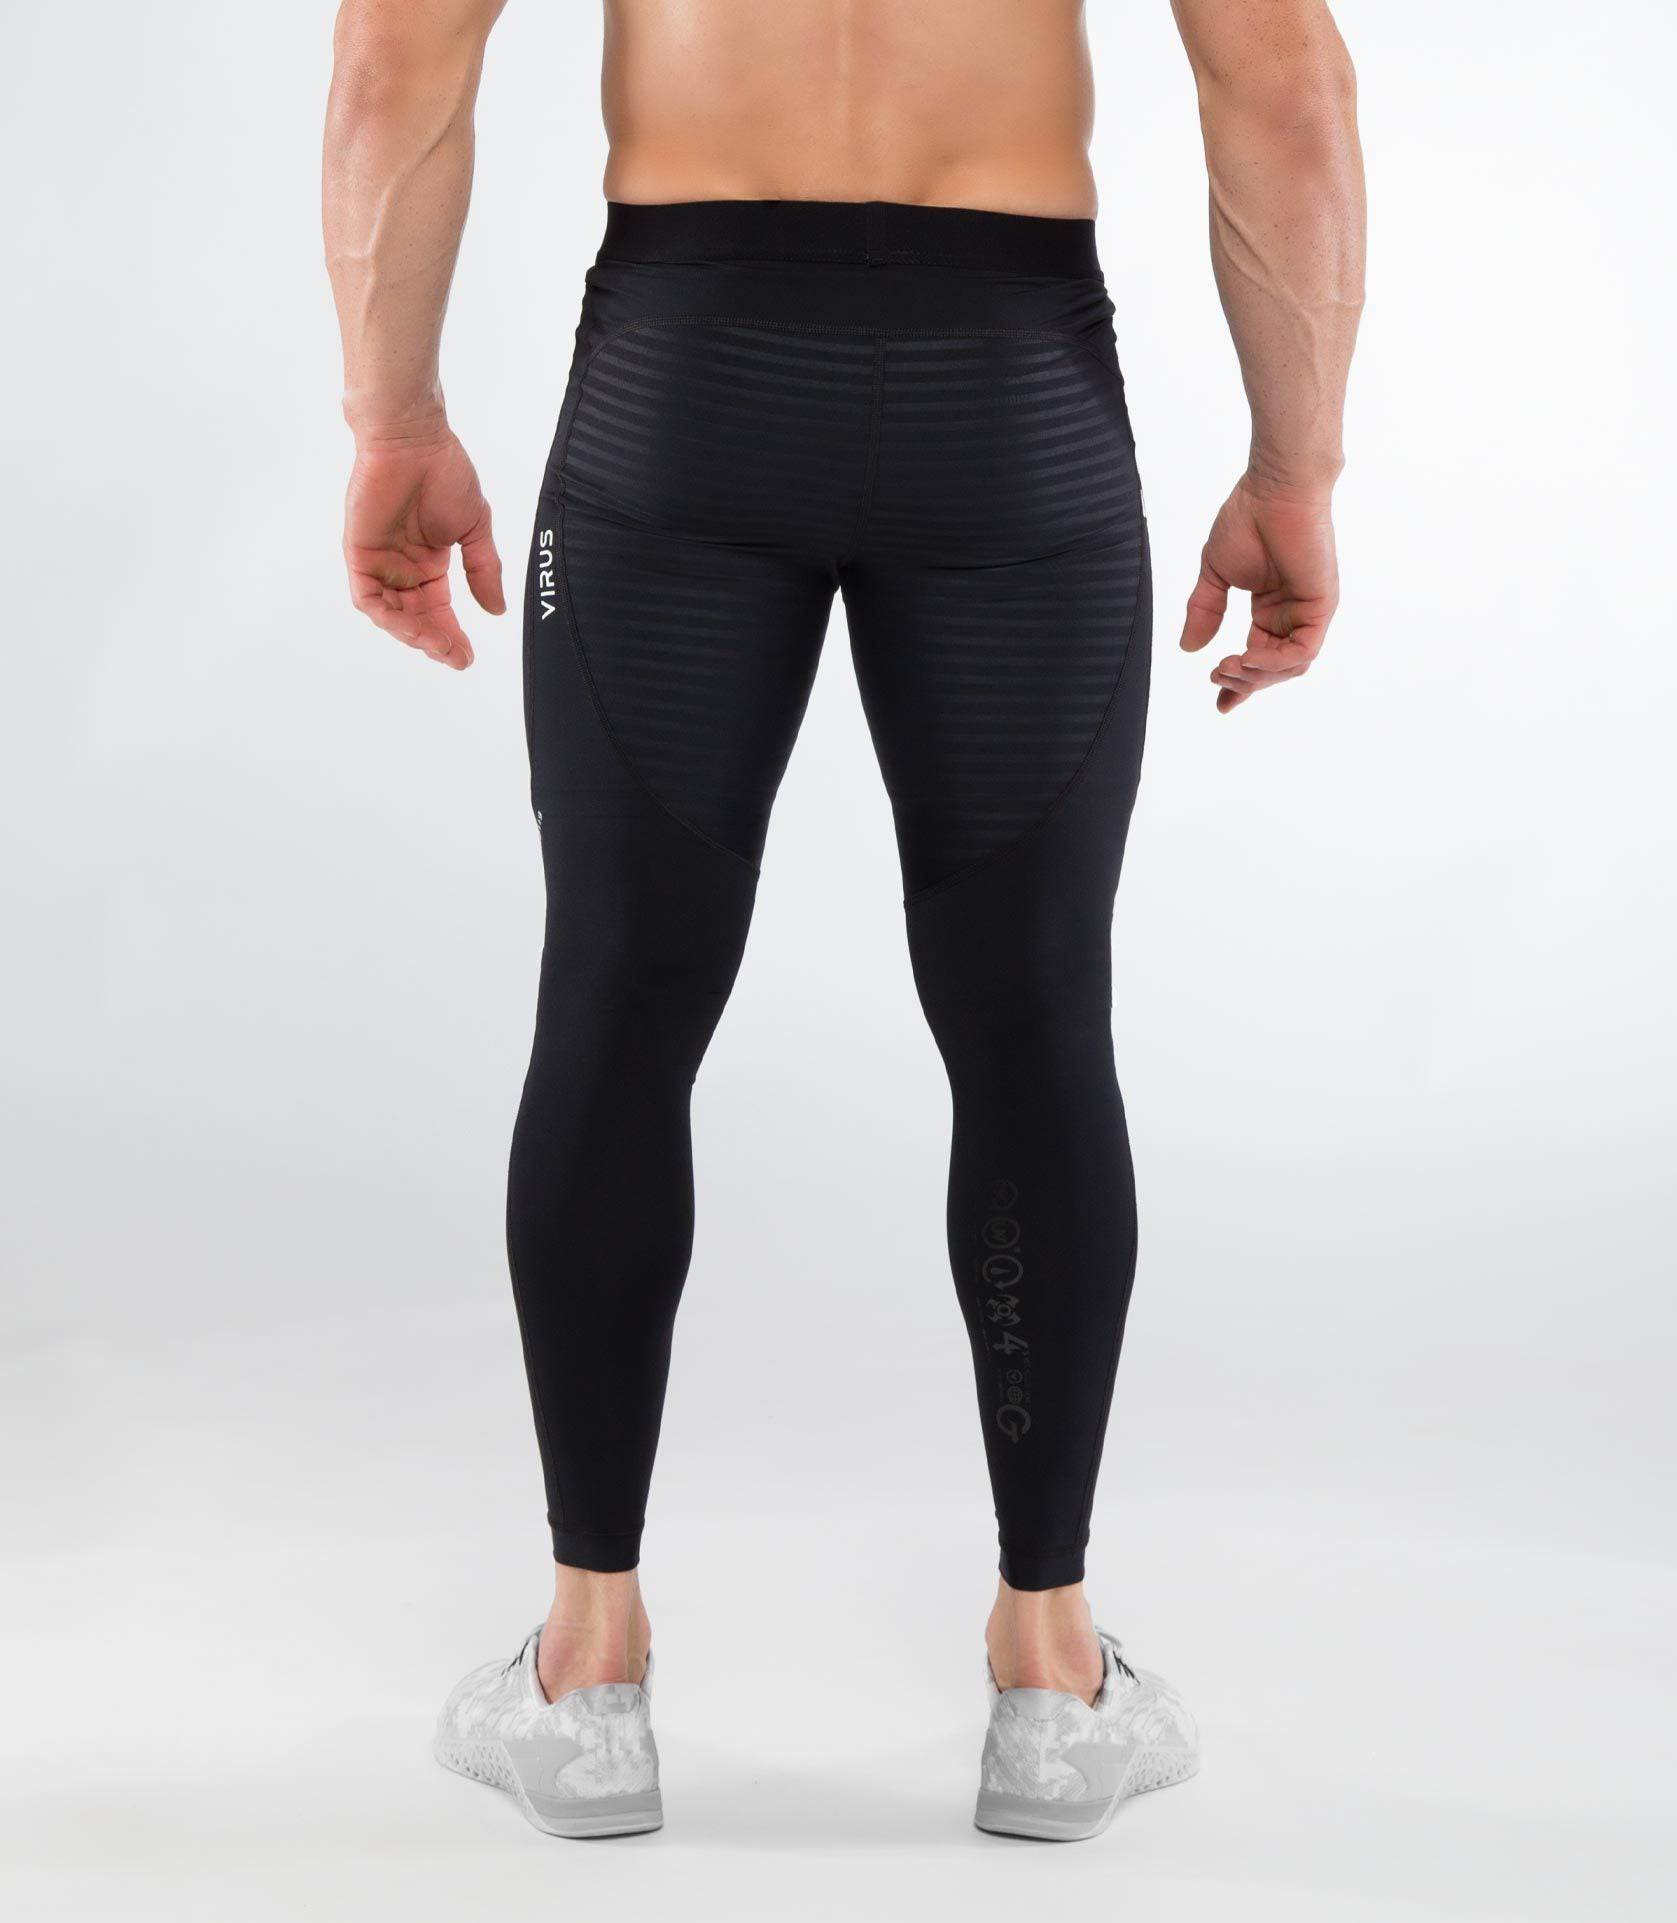 Virus | CO38 Align Stay Cool Compression Pants - XTC Fitness - Exercise Equipment Superstore - Canada - Pants